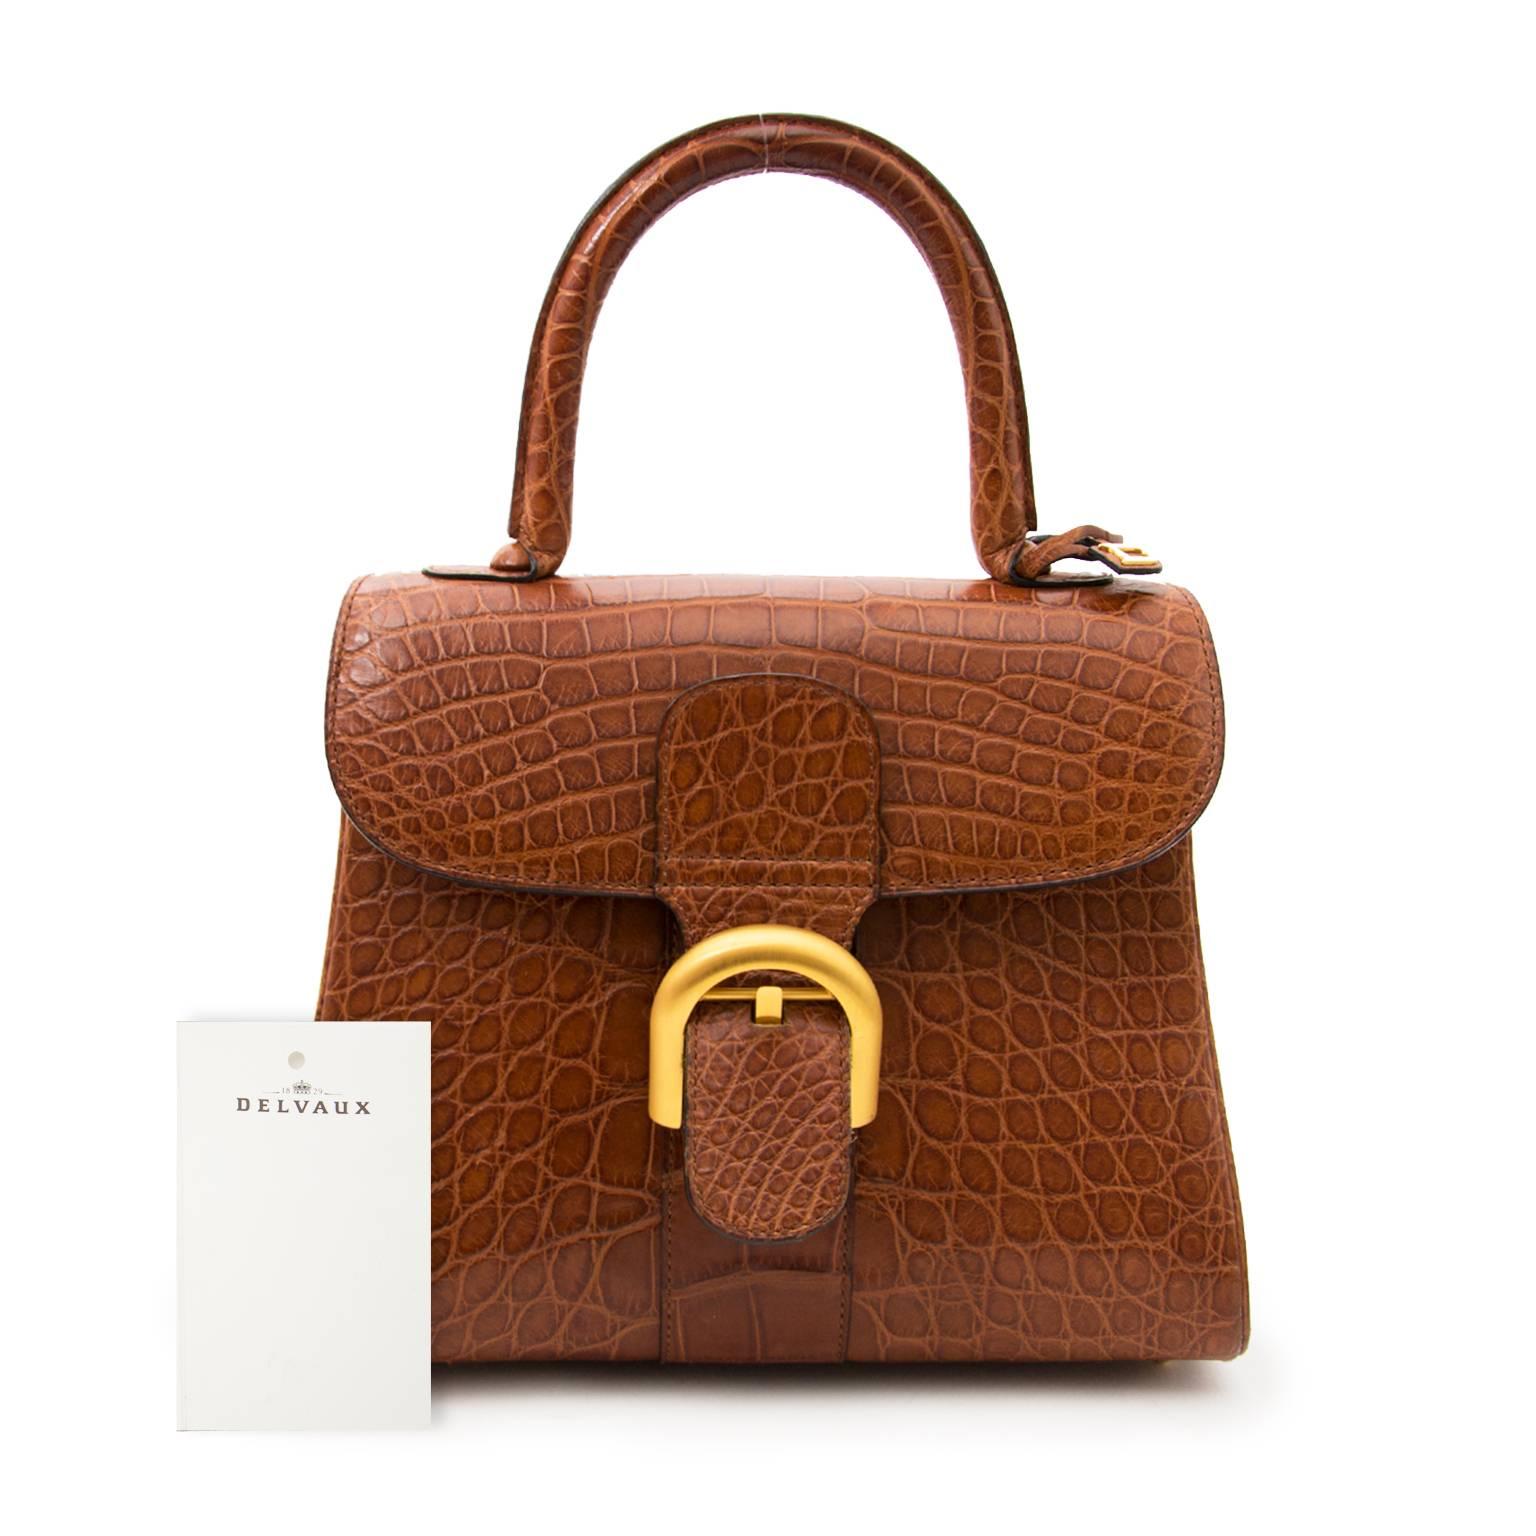 What an exceptional find : Iconic Delvaux Brillant handbag in matte crocodile hide.
The bag is in great condition, has only some minor signs of wear on the corners.
Delvaux is the oldest fine leather luxury goods House in the world.
Founded in